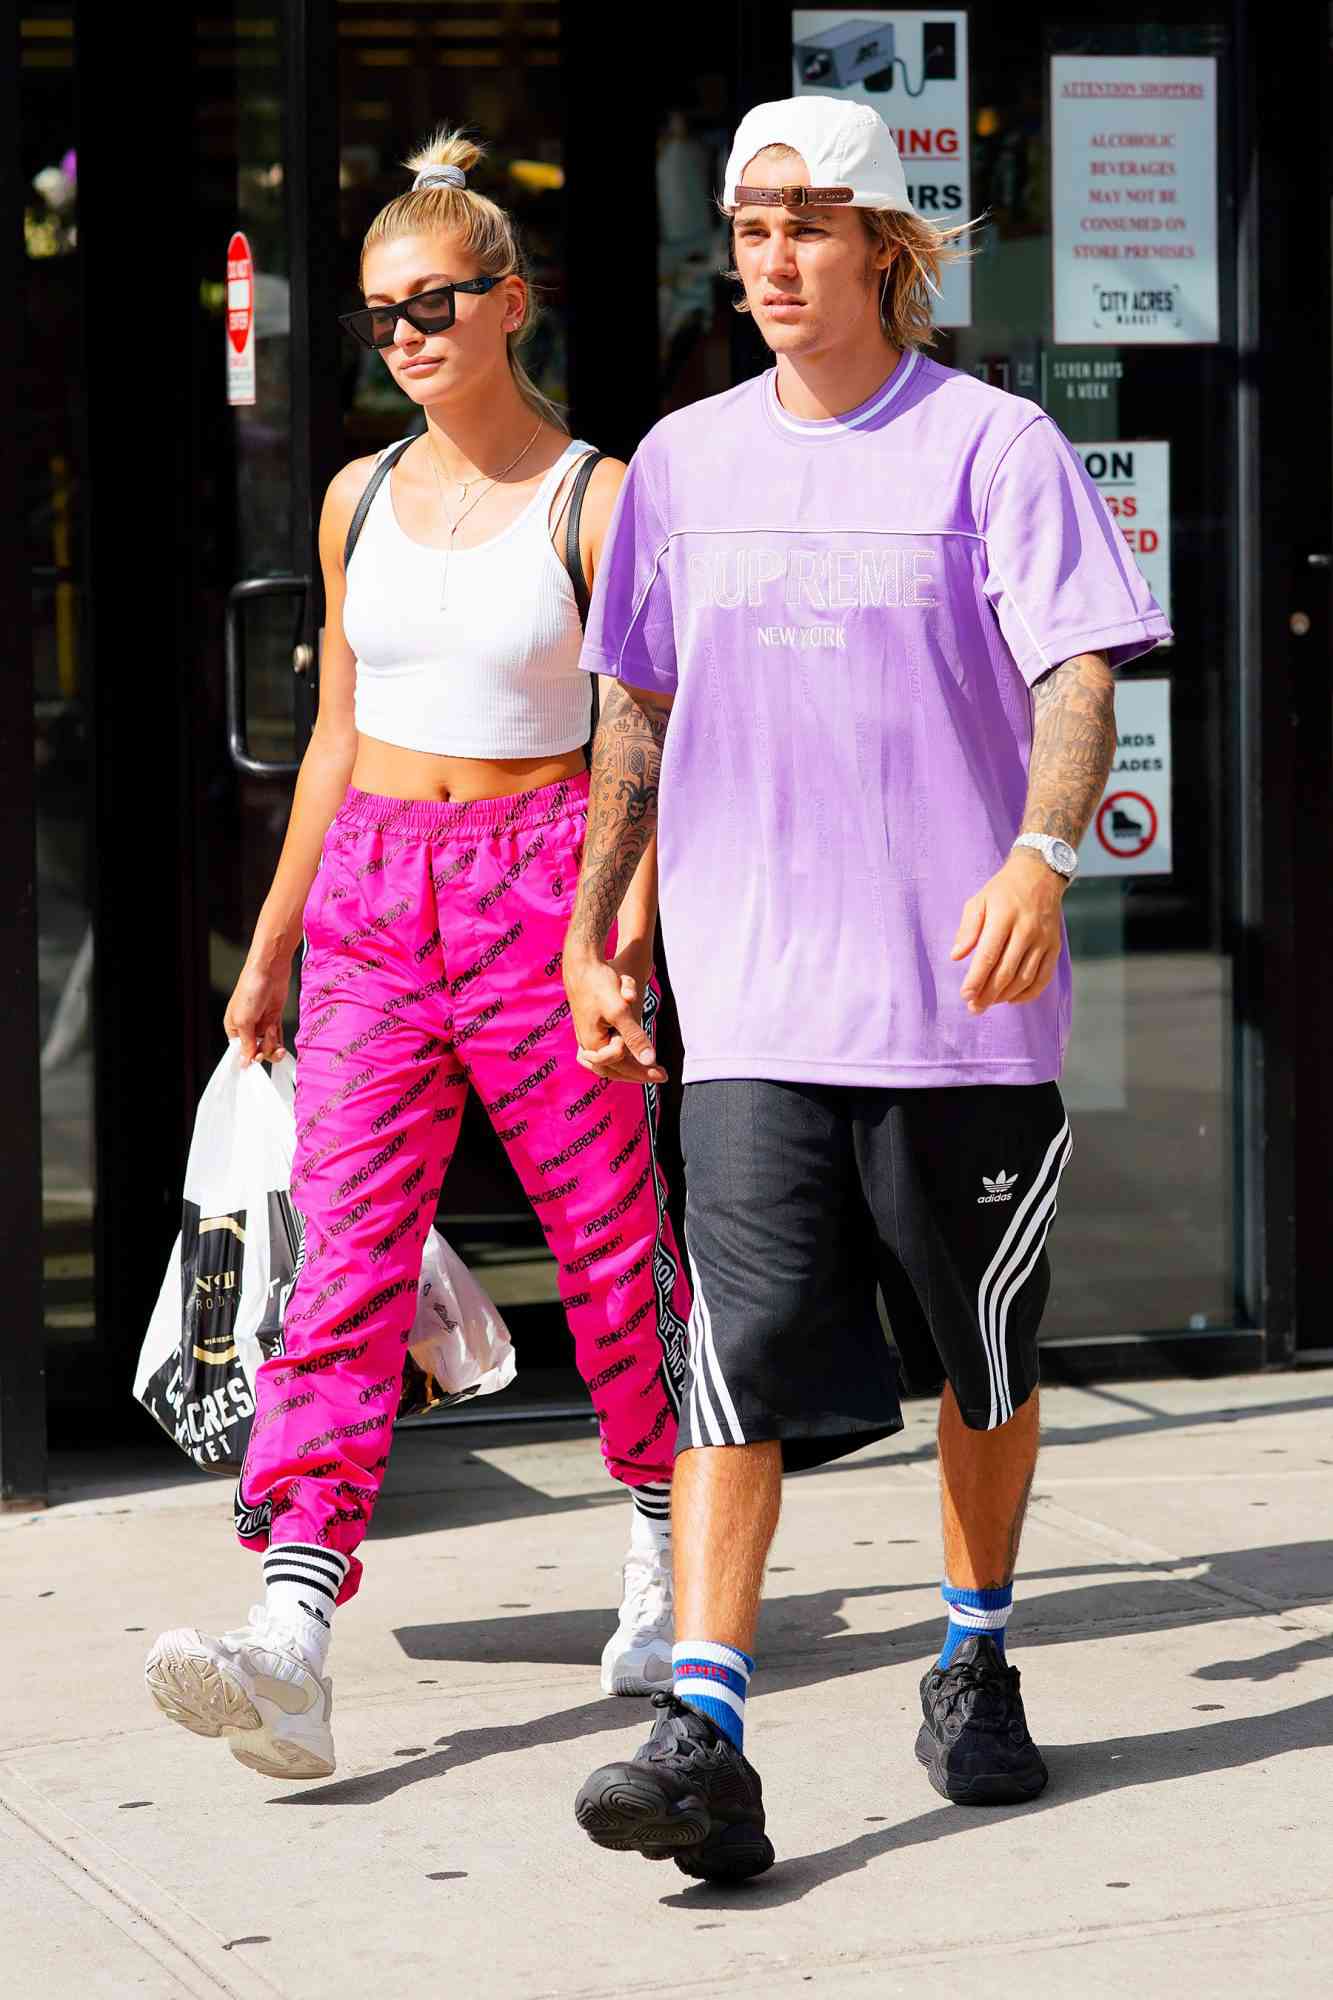 EXCLUSIVE: Hailey Baldwin Spotted With Fiance Justin Bieber In New York